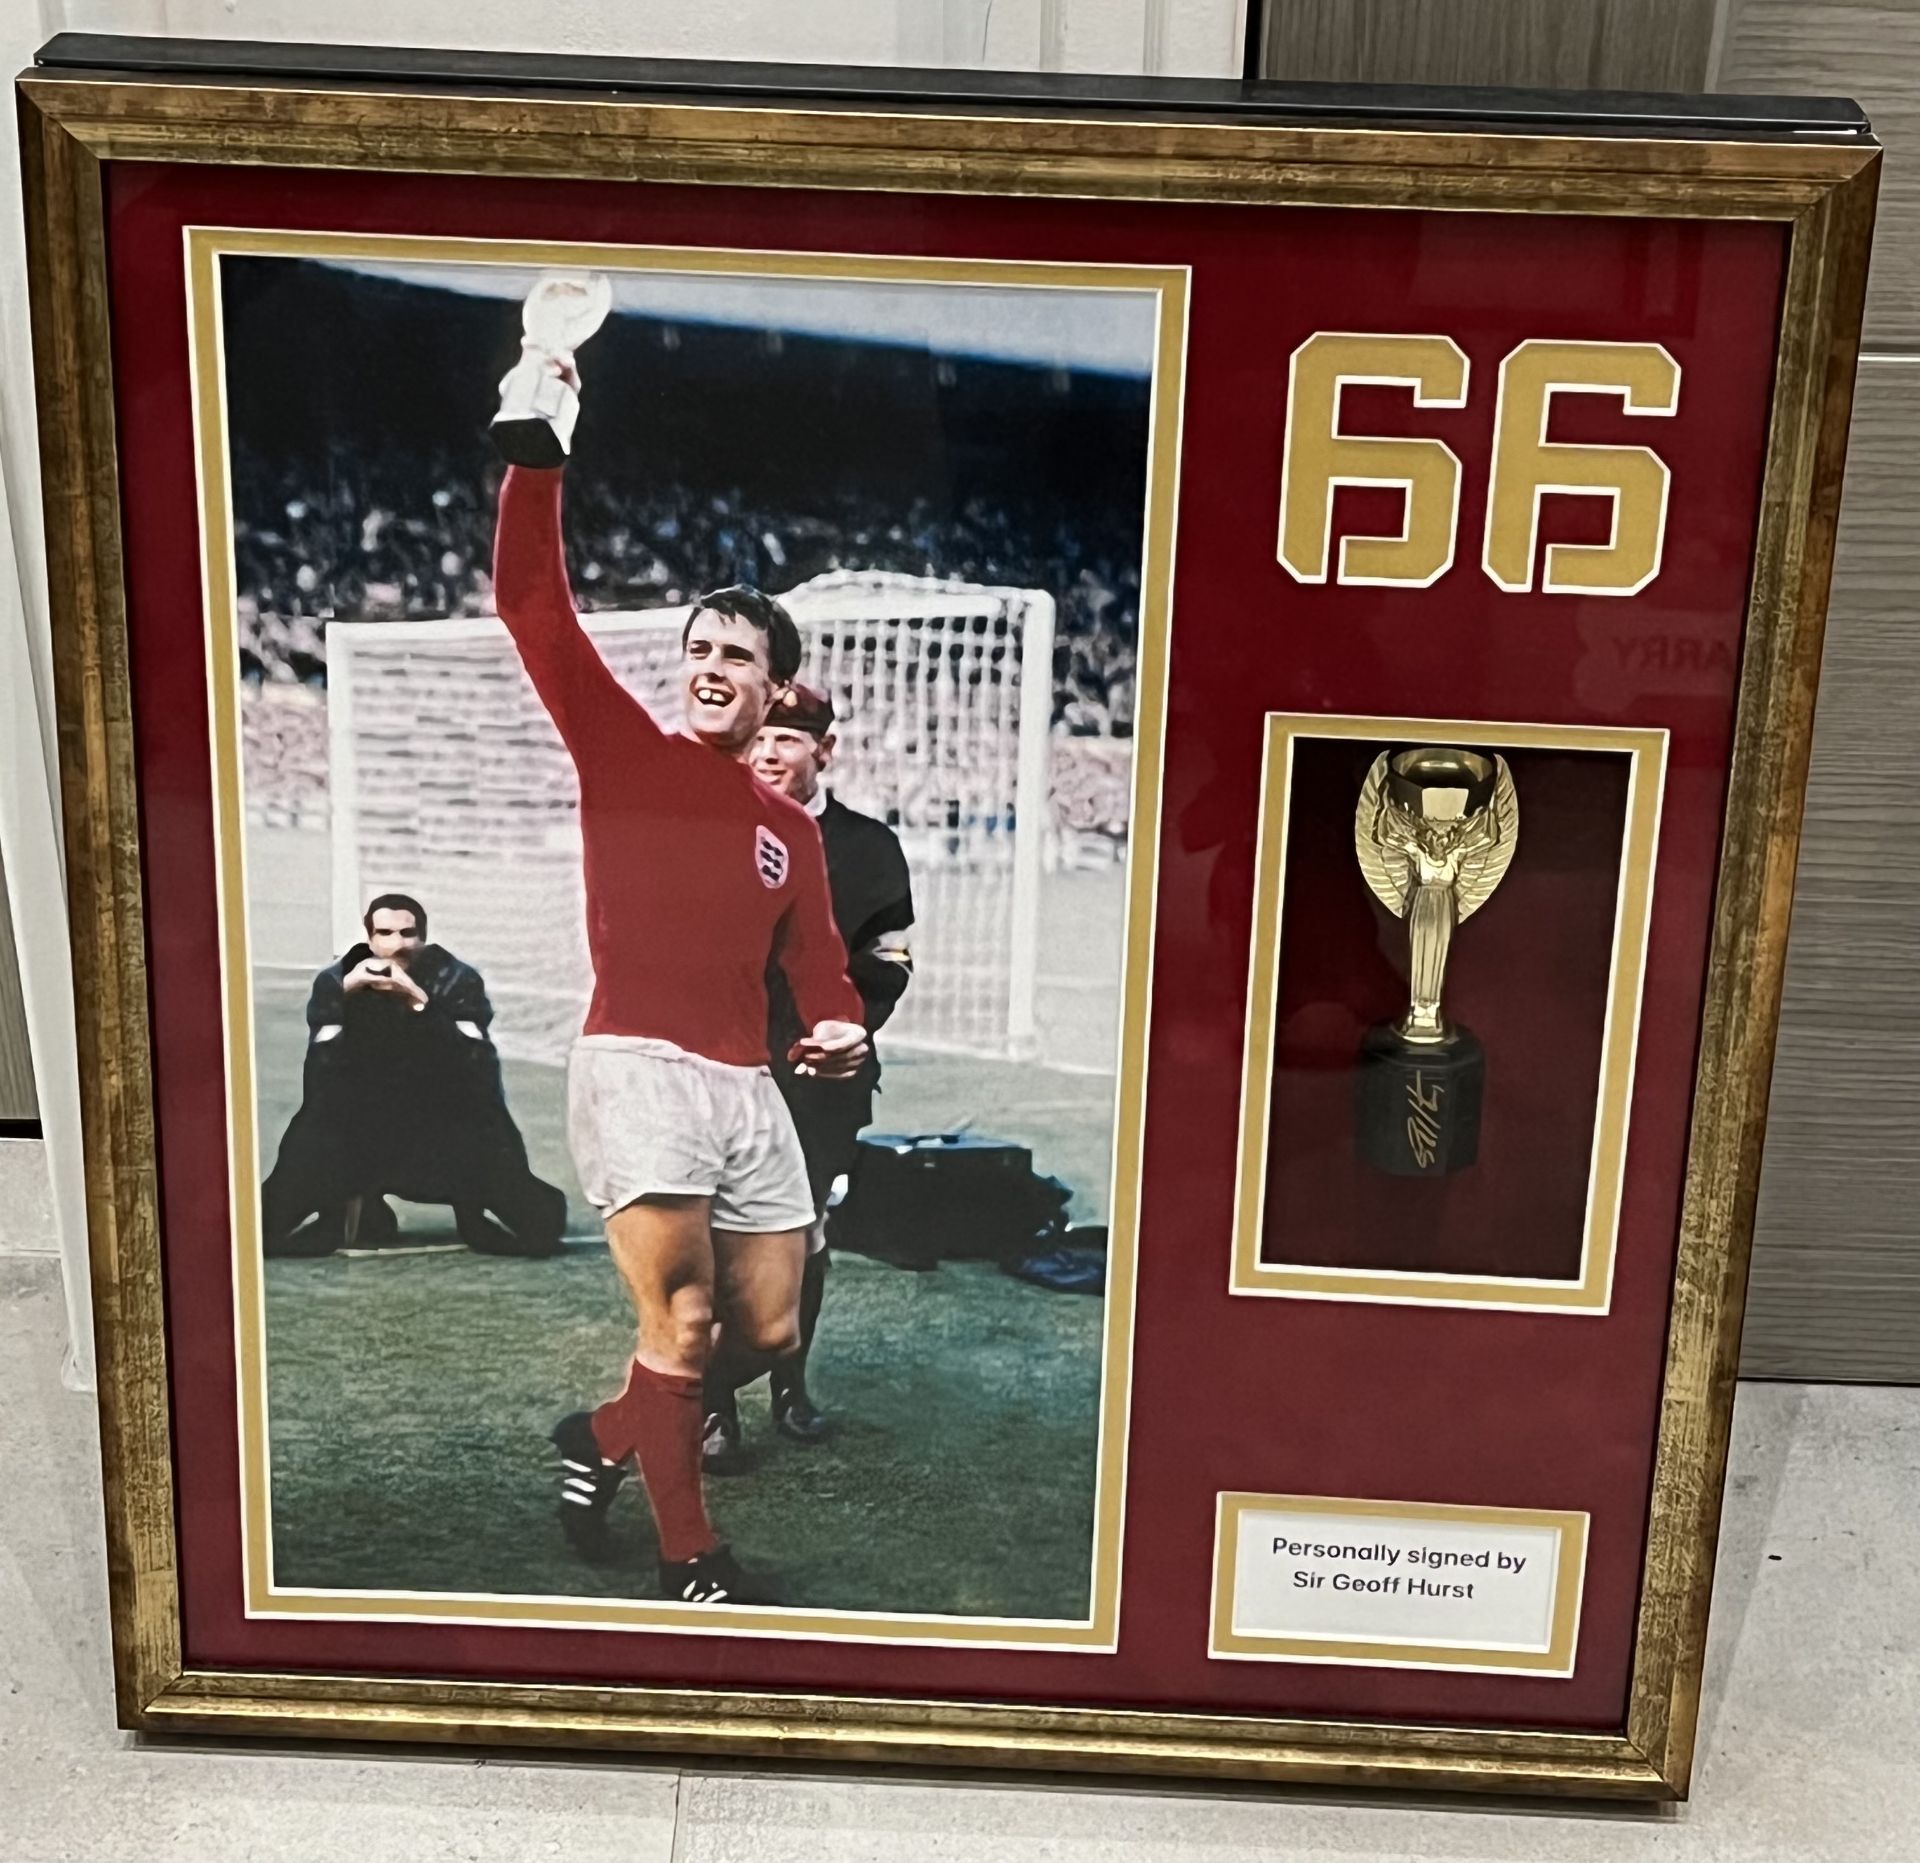 HAND SIGNED ‘SIR GEOFF HURST’ 1966 WORLD CUP TROPHY PRESENTATION WITH COA - NO VAT!